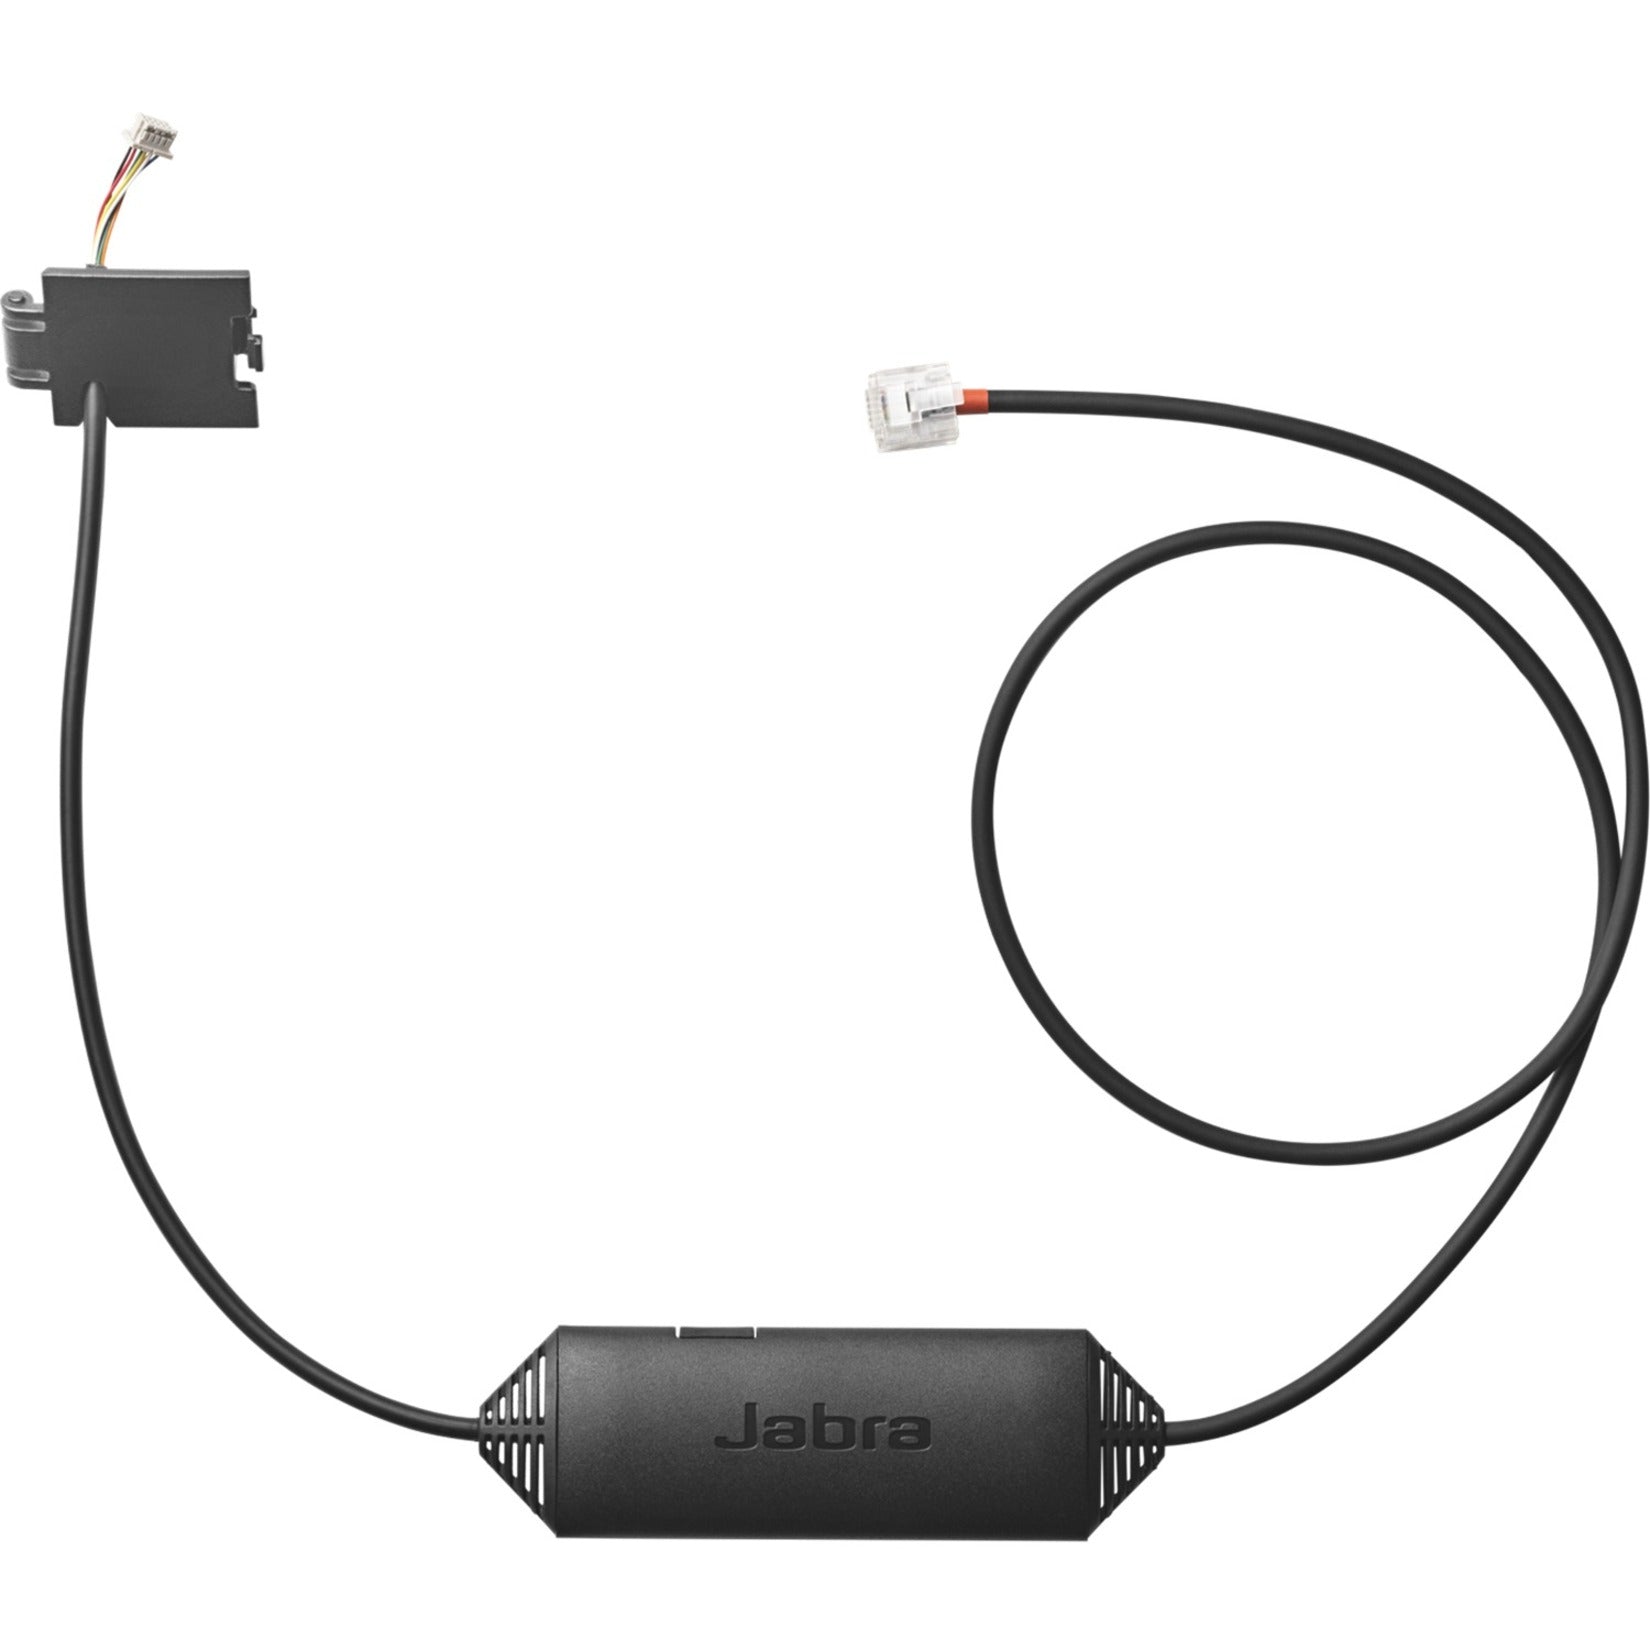 Jabra 14201-44 Link Phone Cable, Electronic Hook Switch, Volume Control